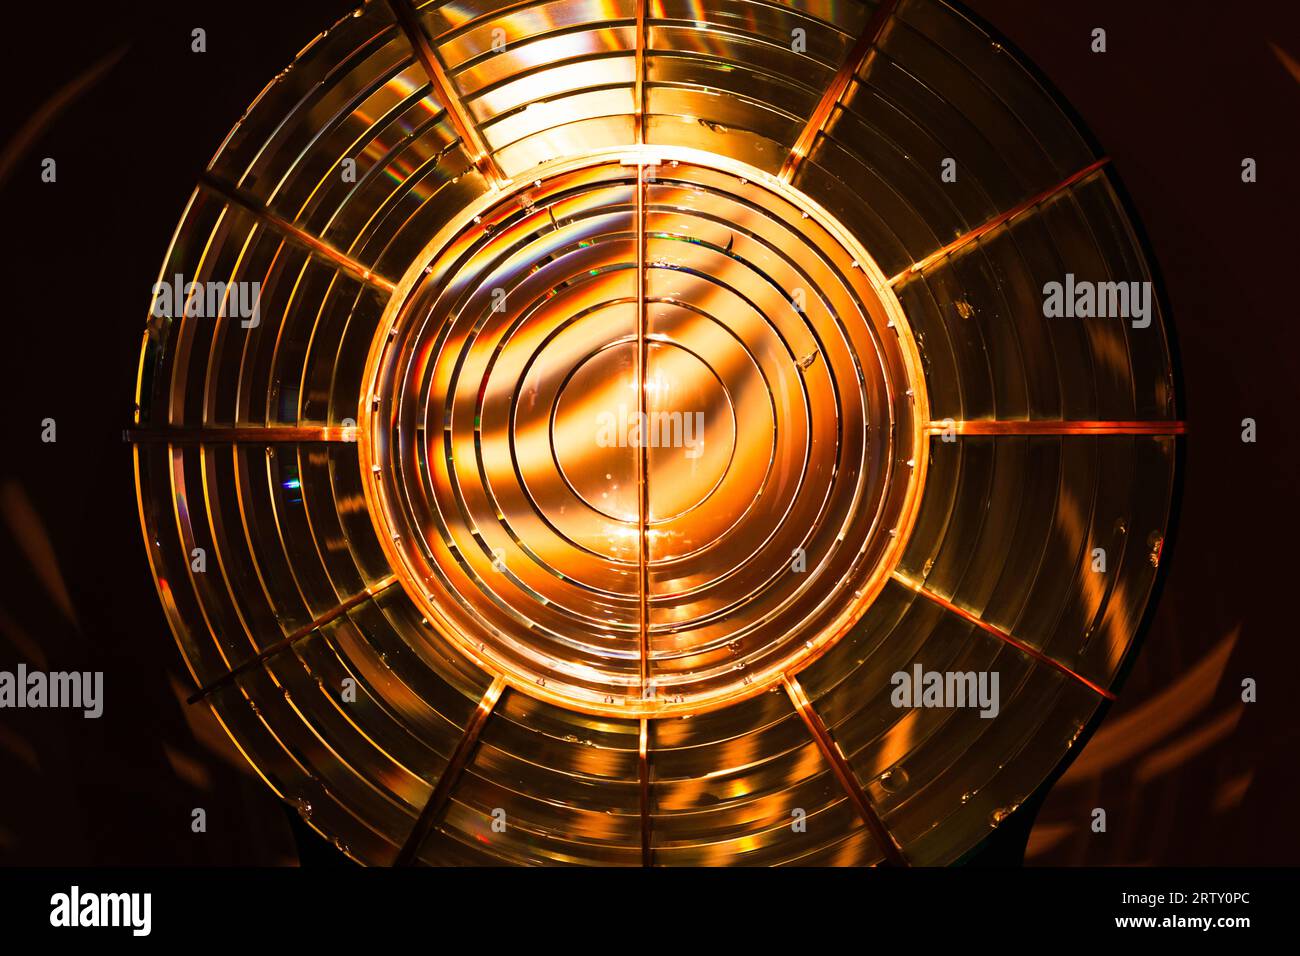 Fresnel lens frontal view. It is a type of composite compact lens developed by the French physicist Augustin-Jean Fresnel for use in lighthouses Stock Photo